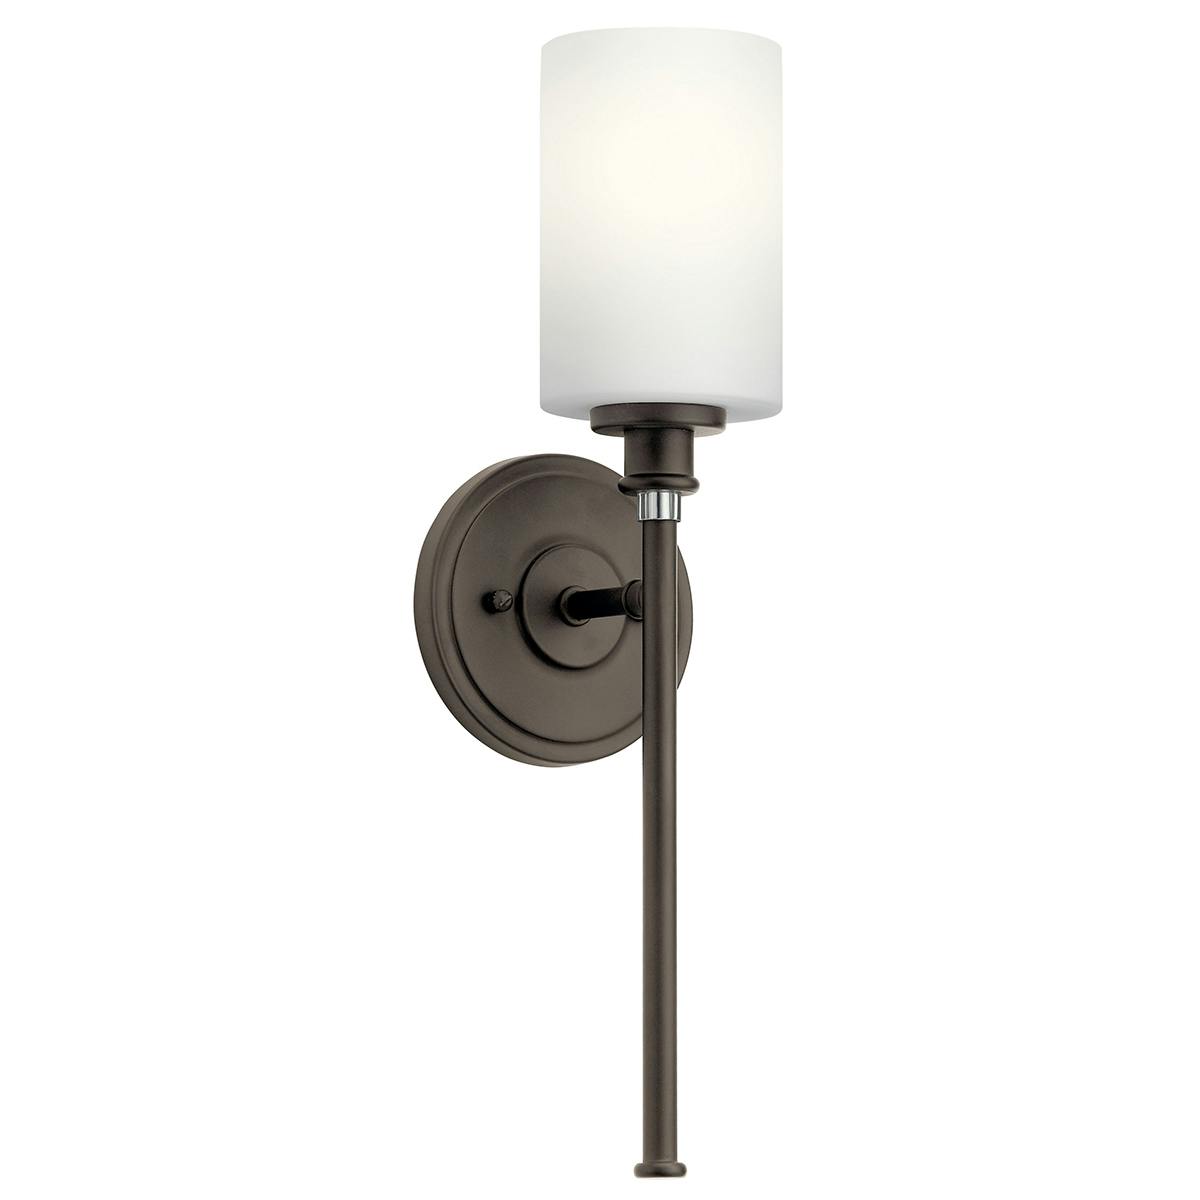 Joelson 1 Light Sconce w/ LED Bulb Bronze on a white background